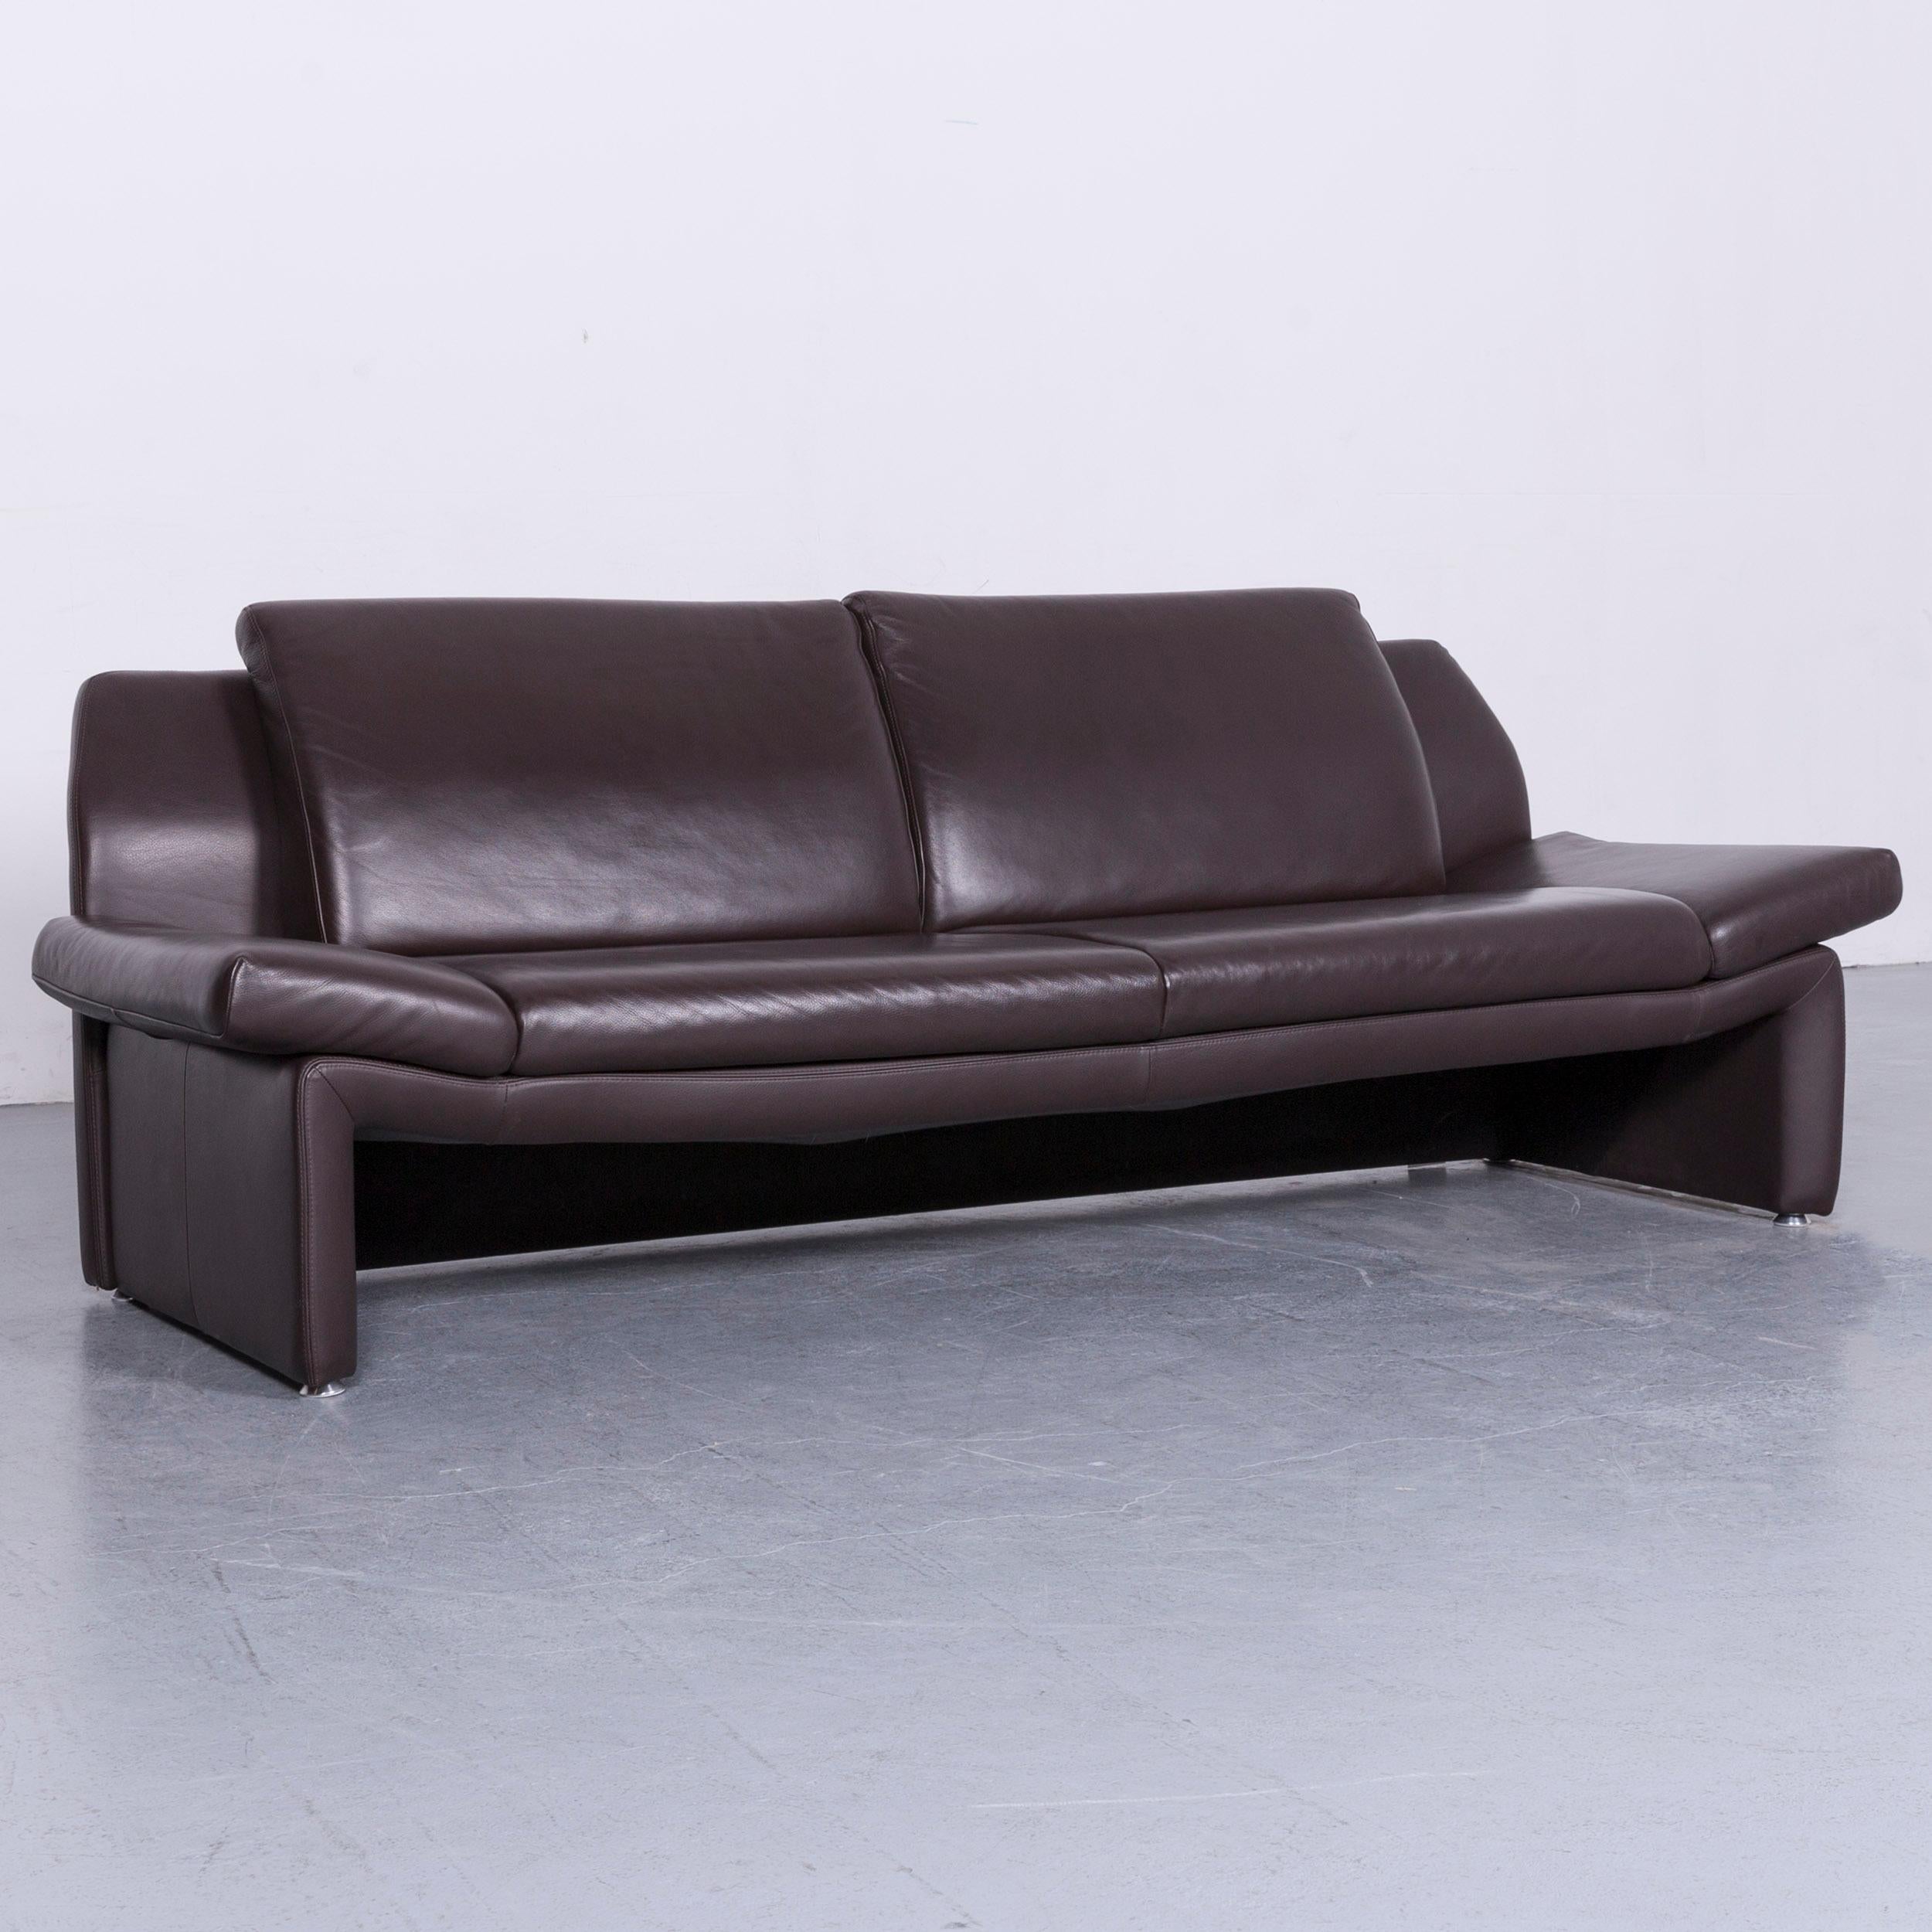 German Laauser Designer Leather Sofa Brown Three-Seat Couch For Sale